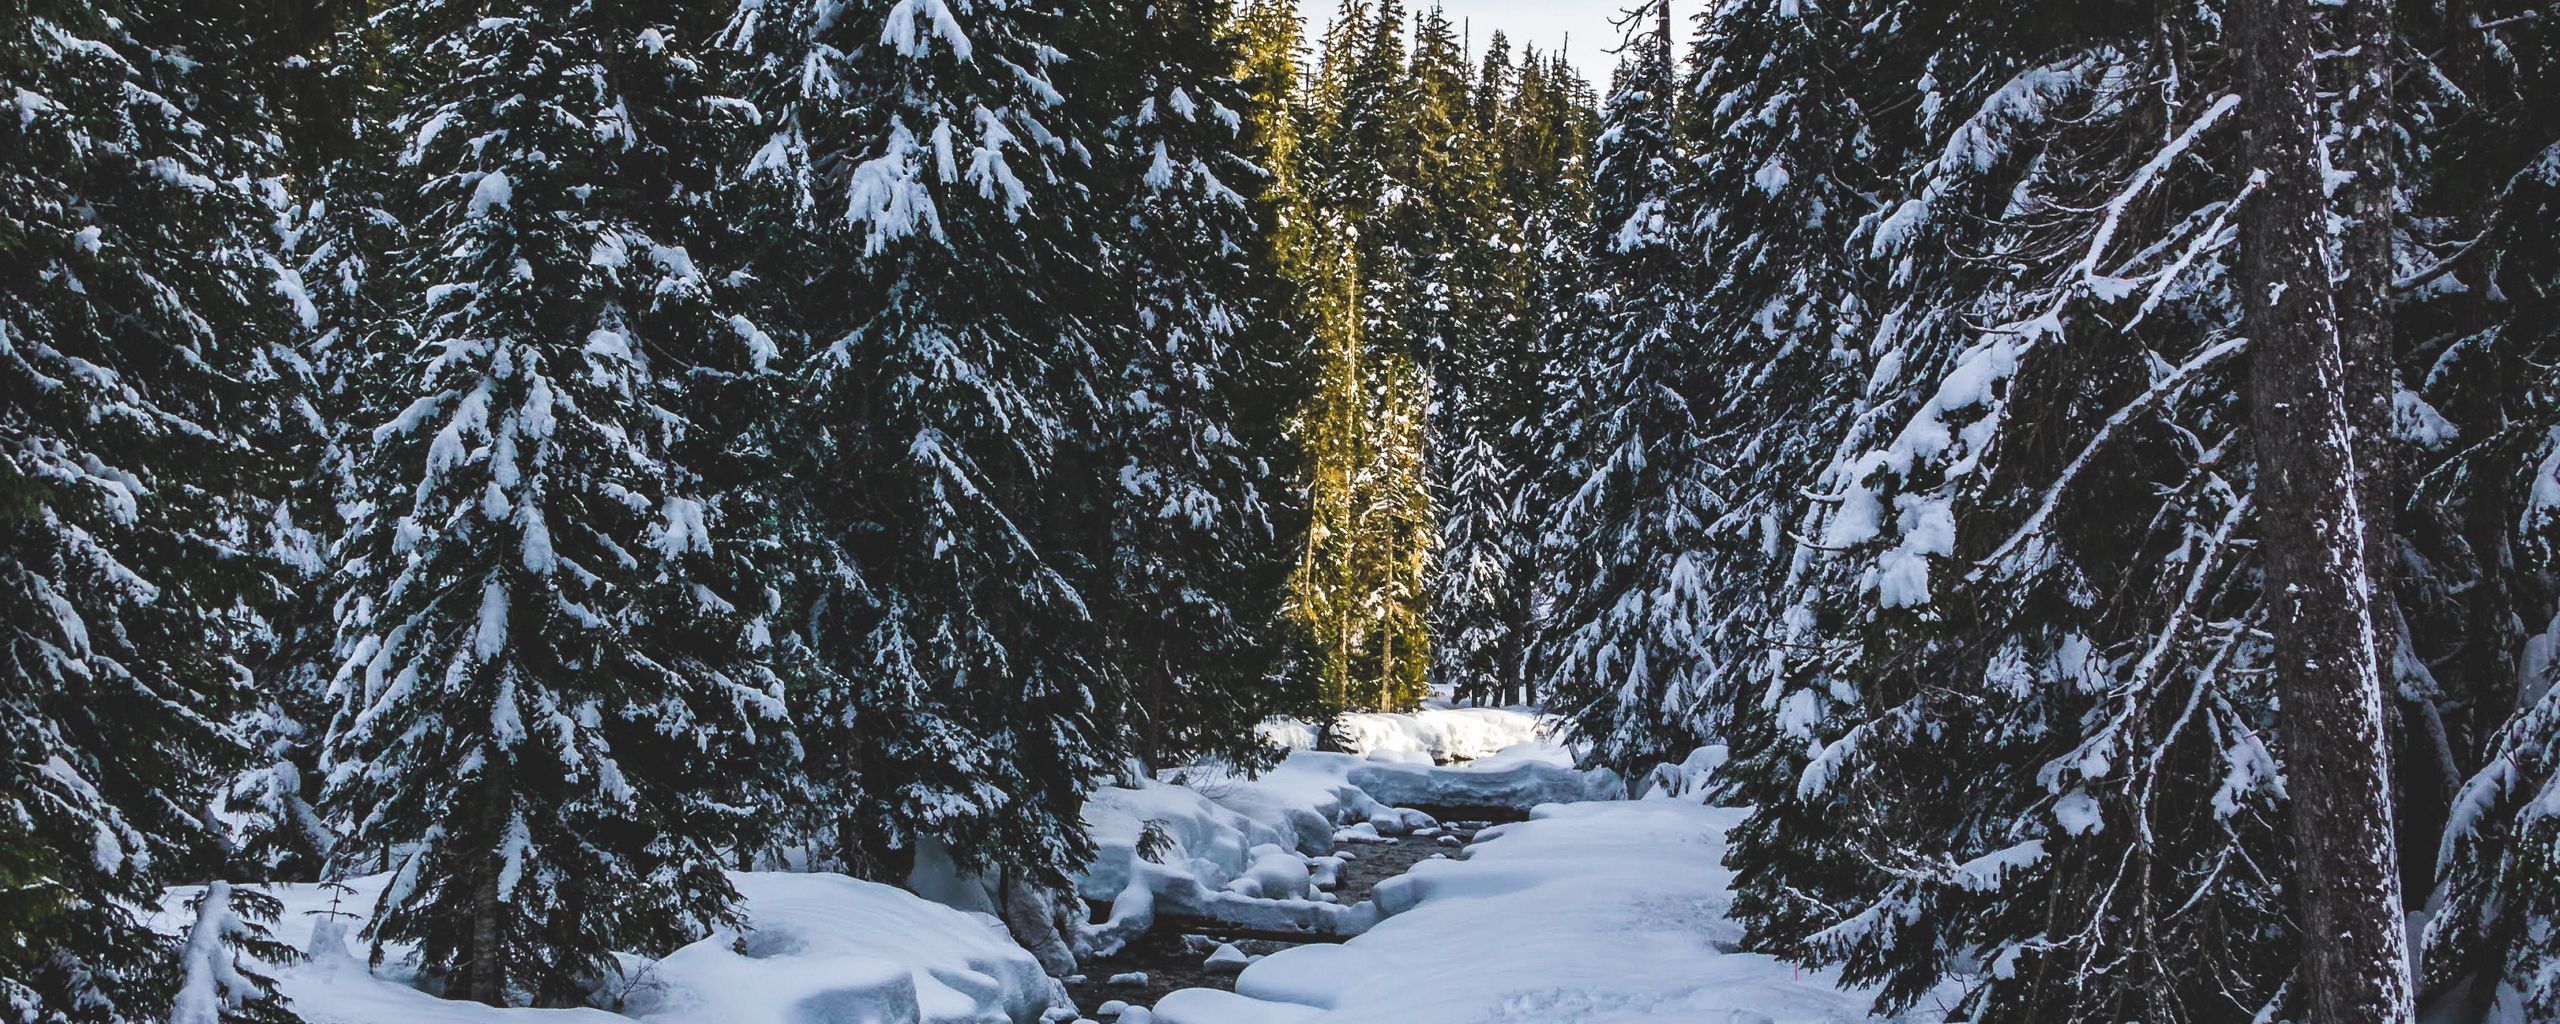 Download wallpaper 2560x1024 river, snow, trees, pines, winter ultrawide monitor HD background